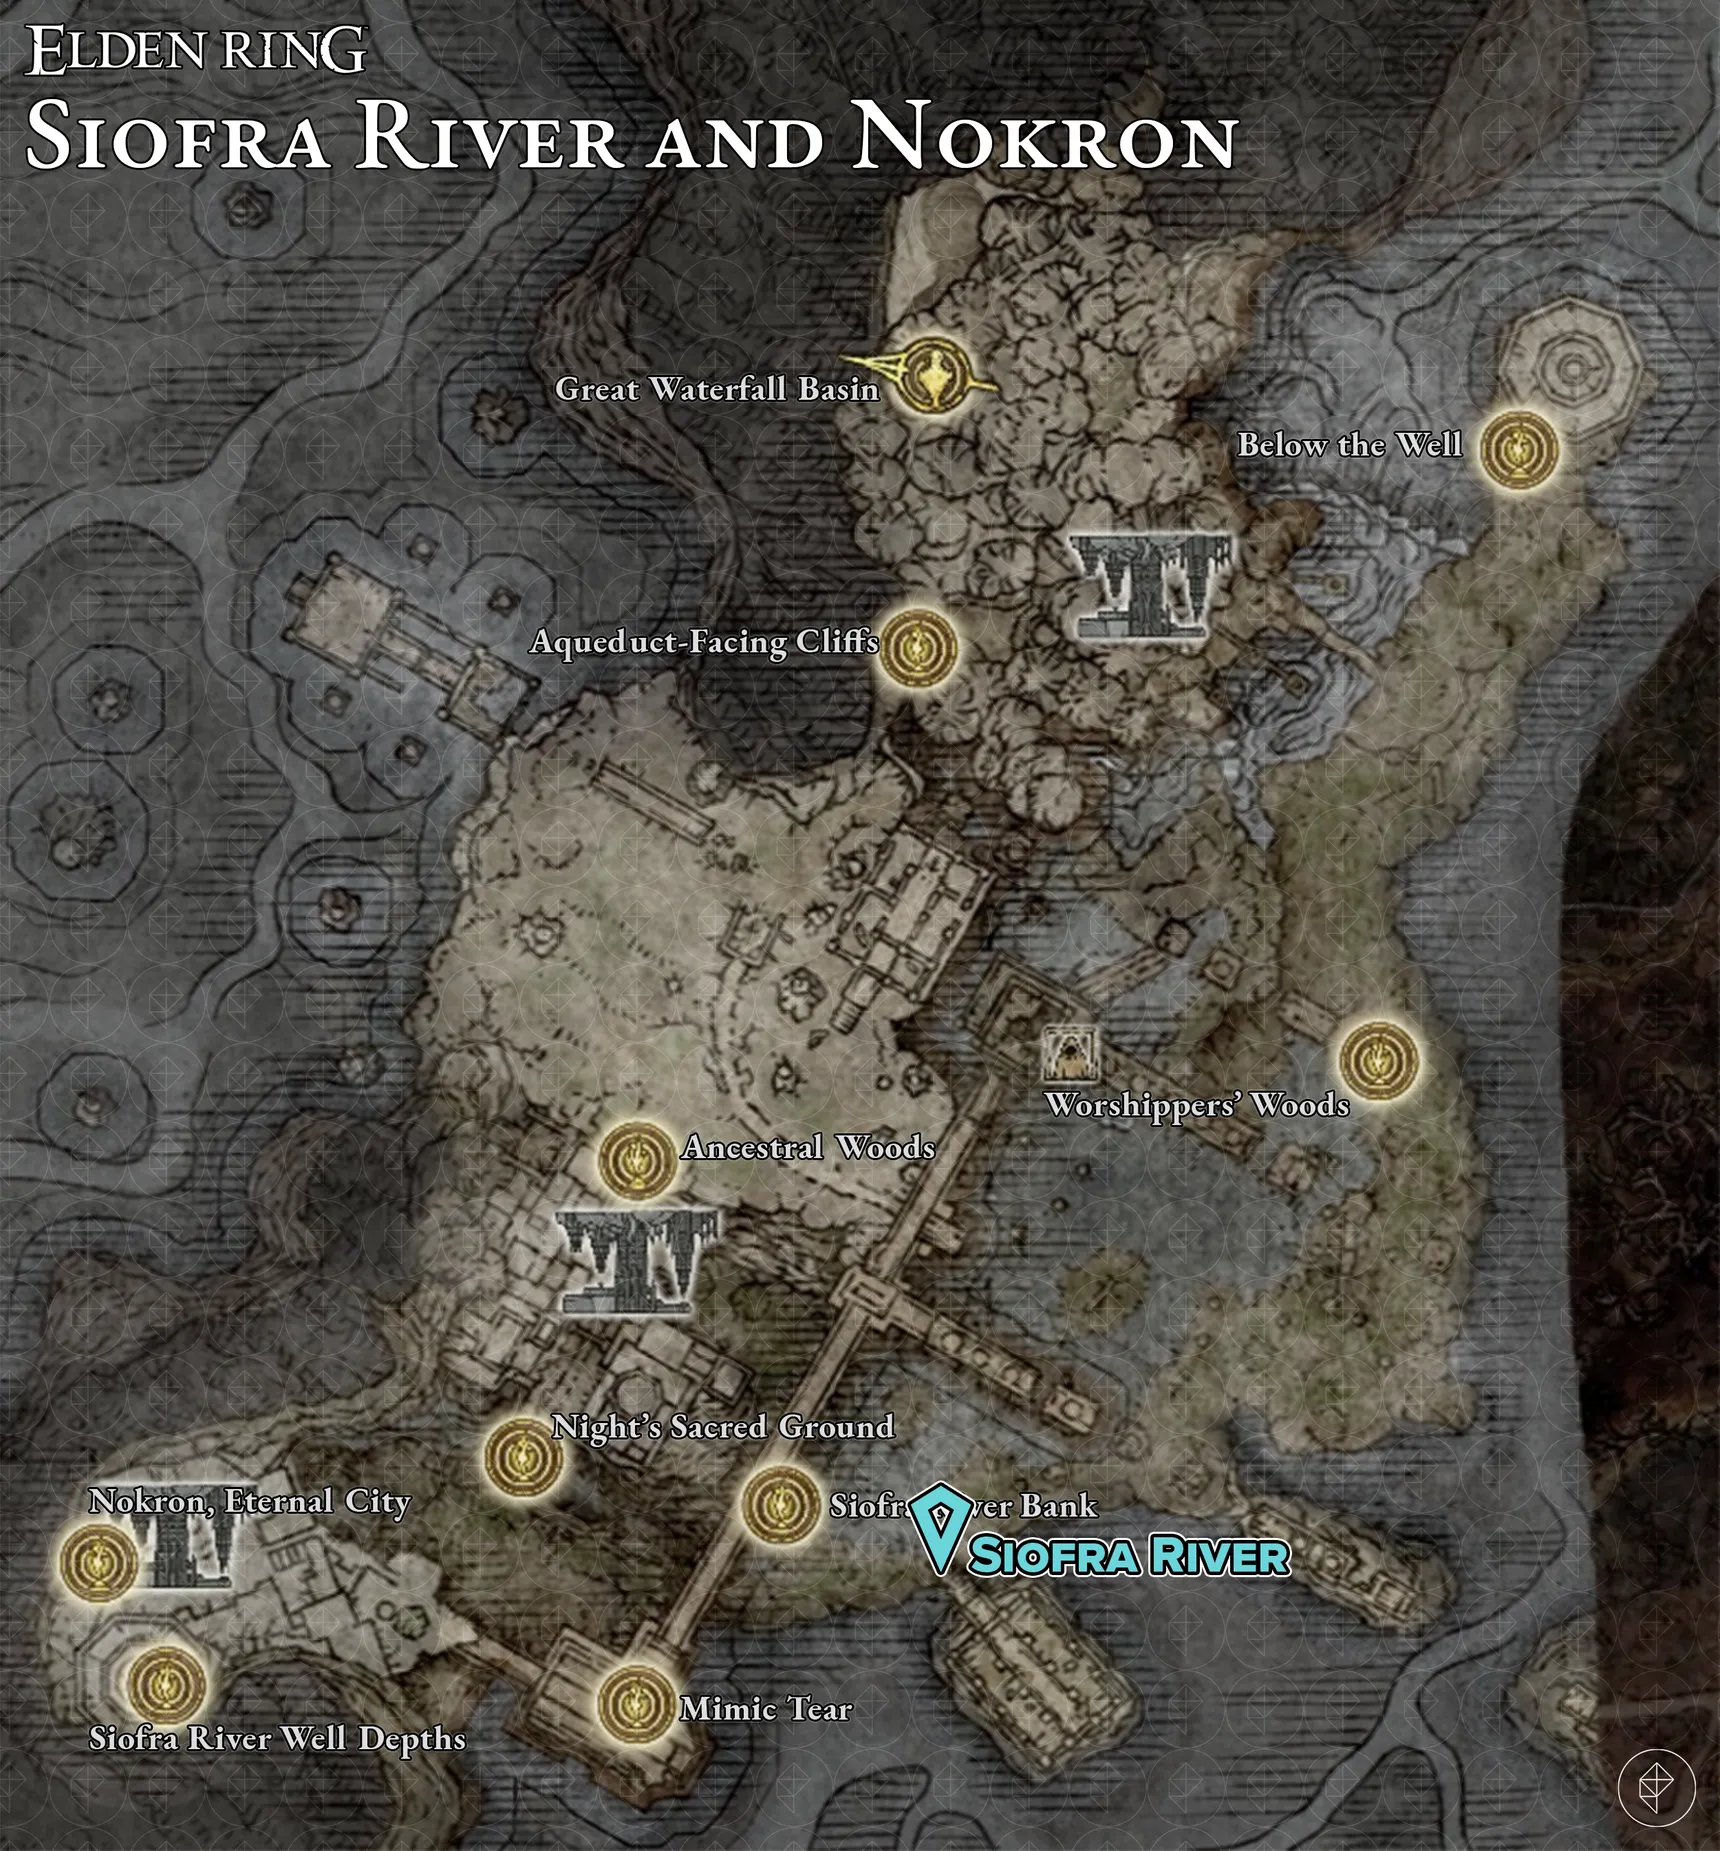 SIOFRA RIVER AND NOKRON, ETERNAL CITY MAP FRAGMENT STELE LOCATION